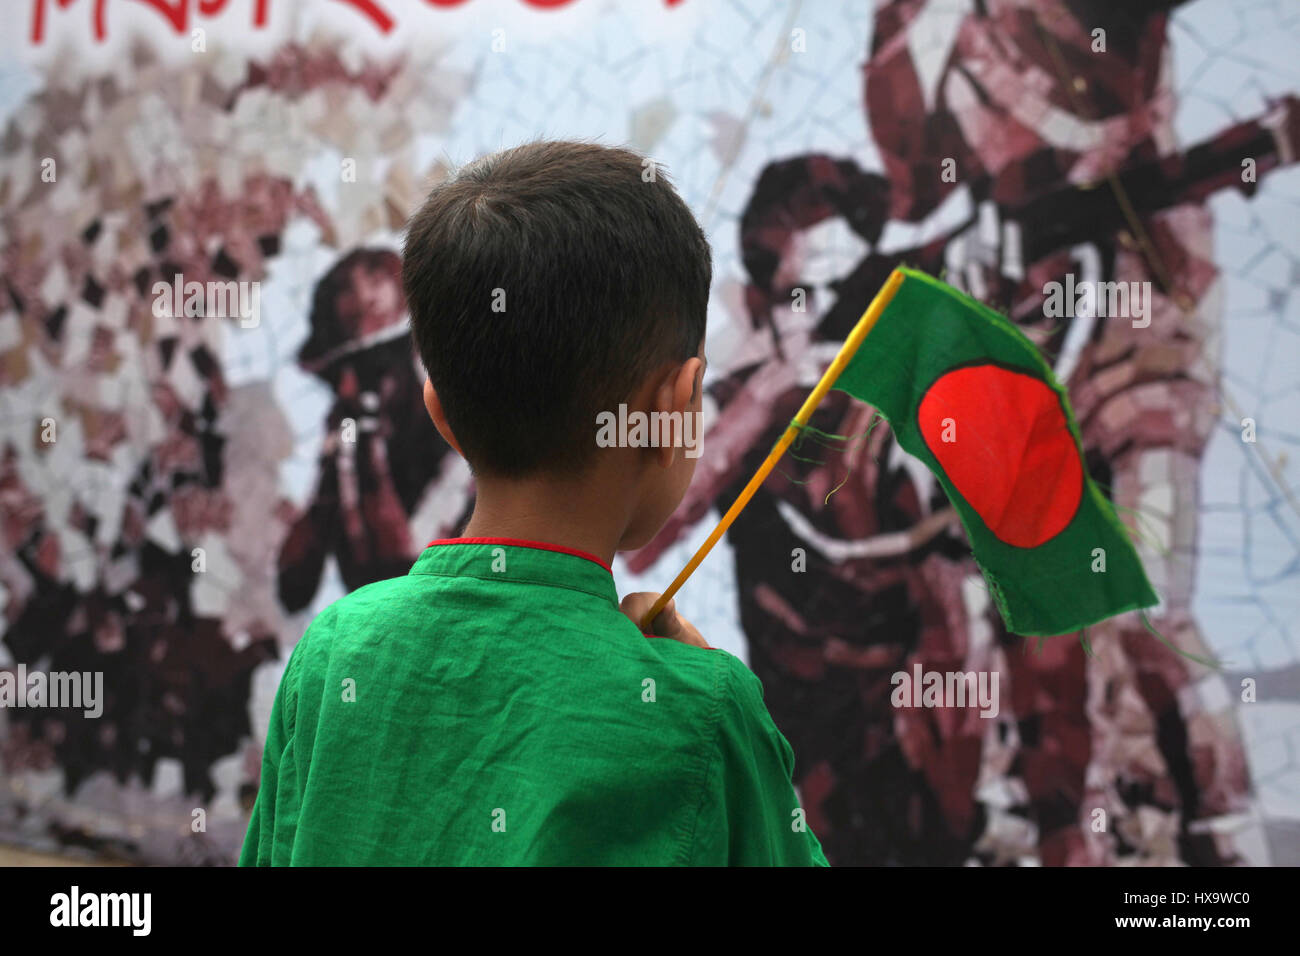 Dhaka, Bangladesh. 26th Mar, 2017. 26 March 2017 Dhaka, Bangladesh ''“ A Bangladeshi children hold a national flag and to see the street wall painting during the nation celebrate 46 Independence Day on 26 March 2017 Dhaka, Bangladesh. In 1971 when the Pakistani occupation forces kicked off one of the worst genocides in history that led to a nine-month war for the independence of Bangladesh in 1971. © Monirul Alam Credit: Monirul Alam/ZUMA Wire/Alamy Live News Stock Photo